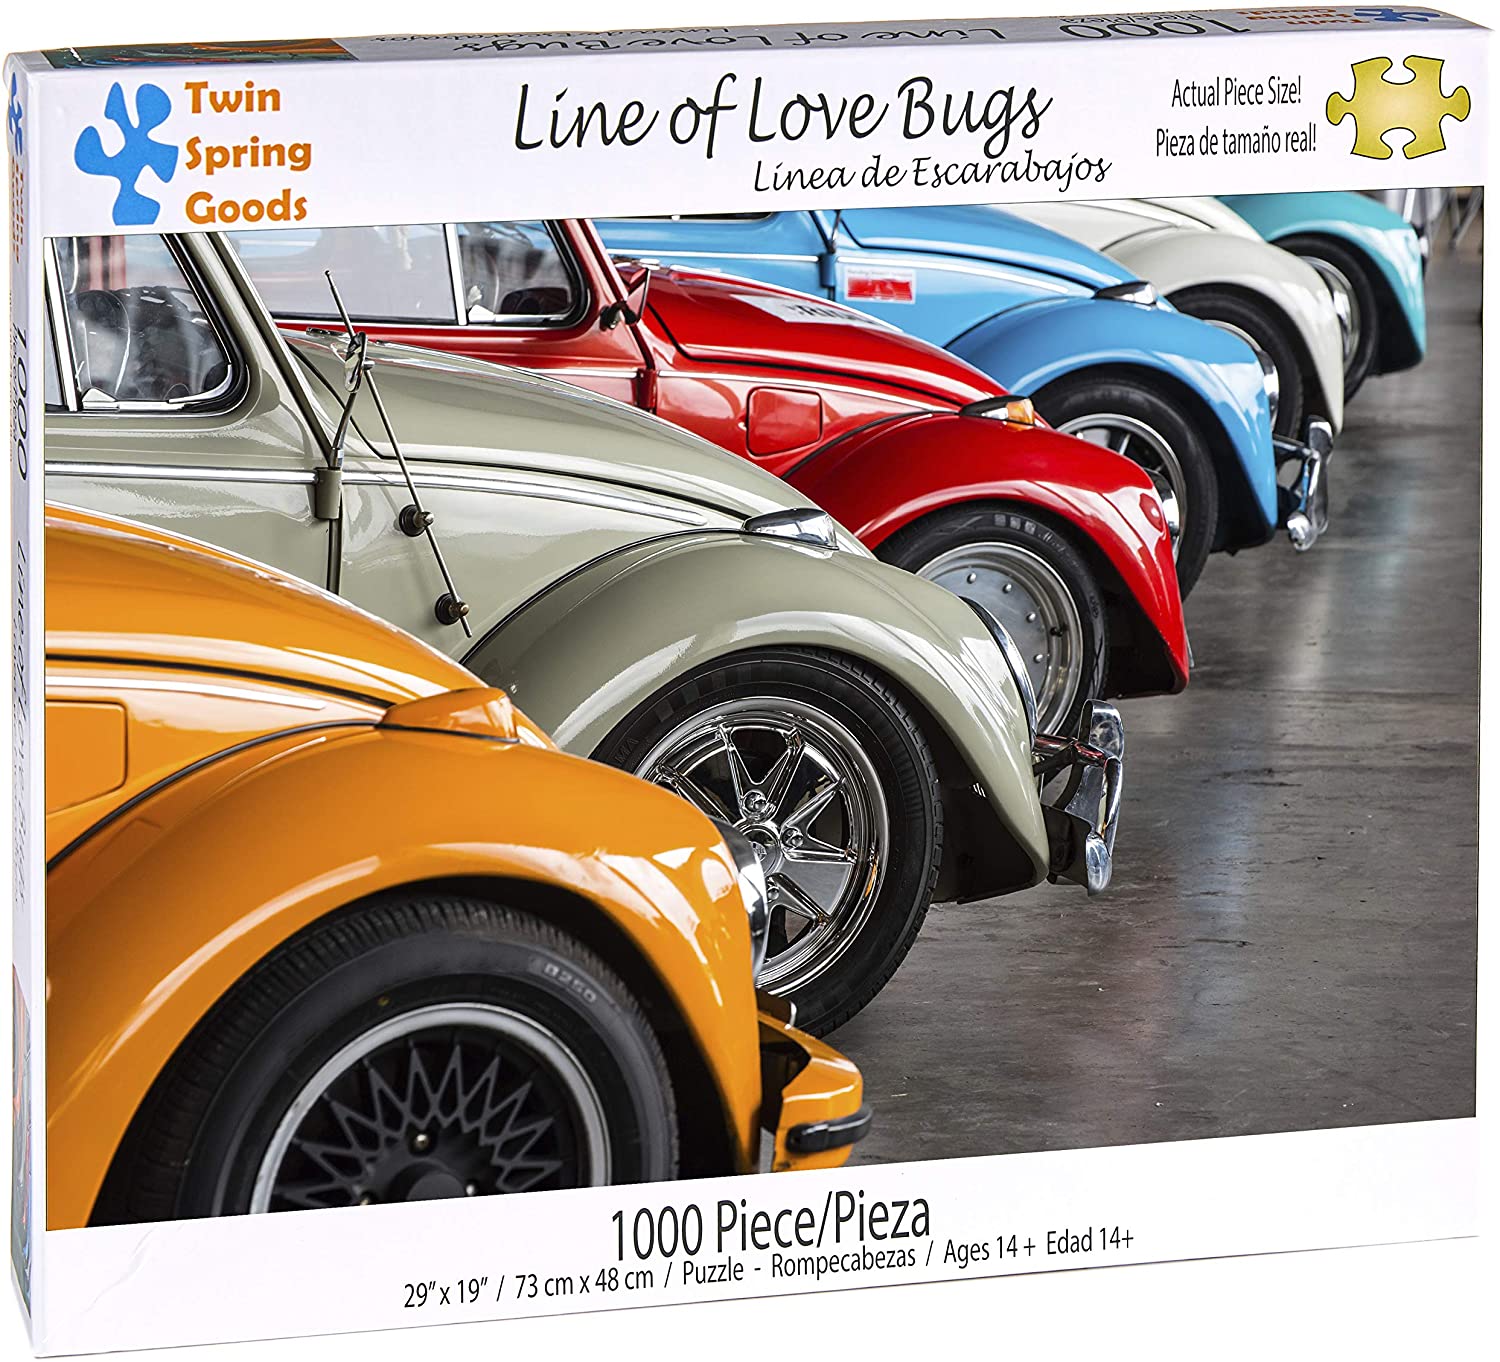 Line of Love Bugs (1000 pc puzzle)